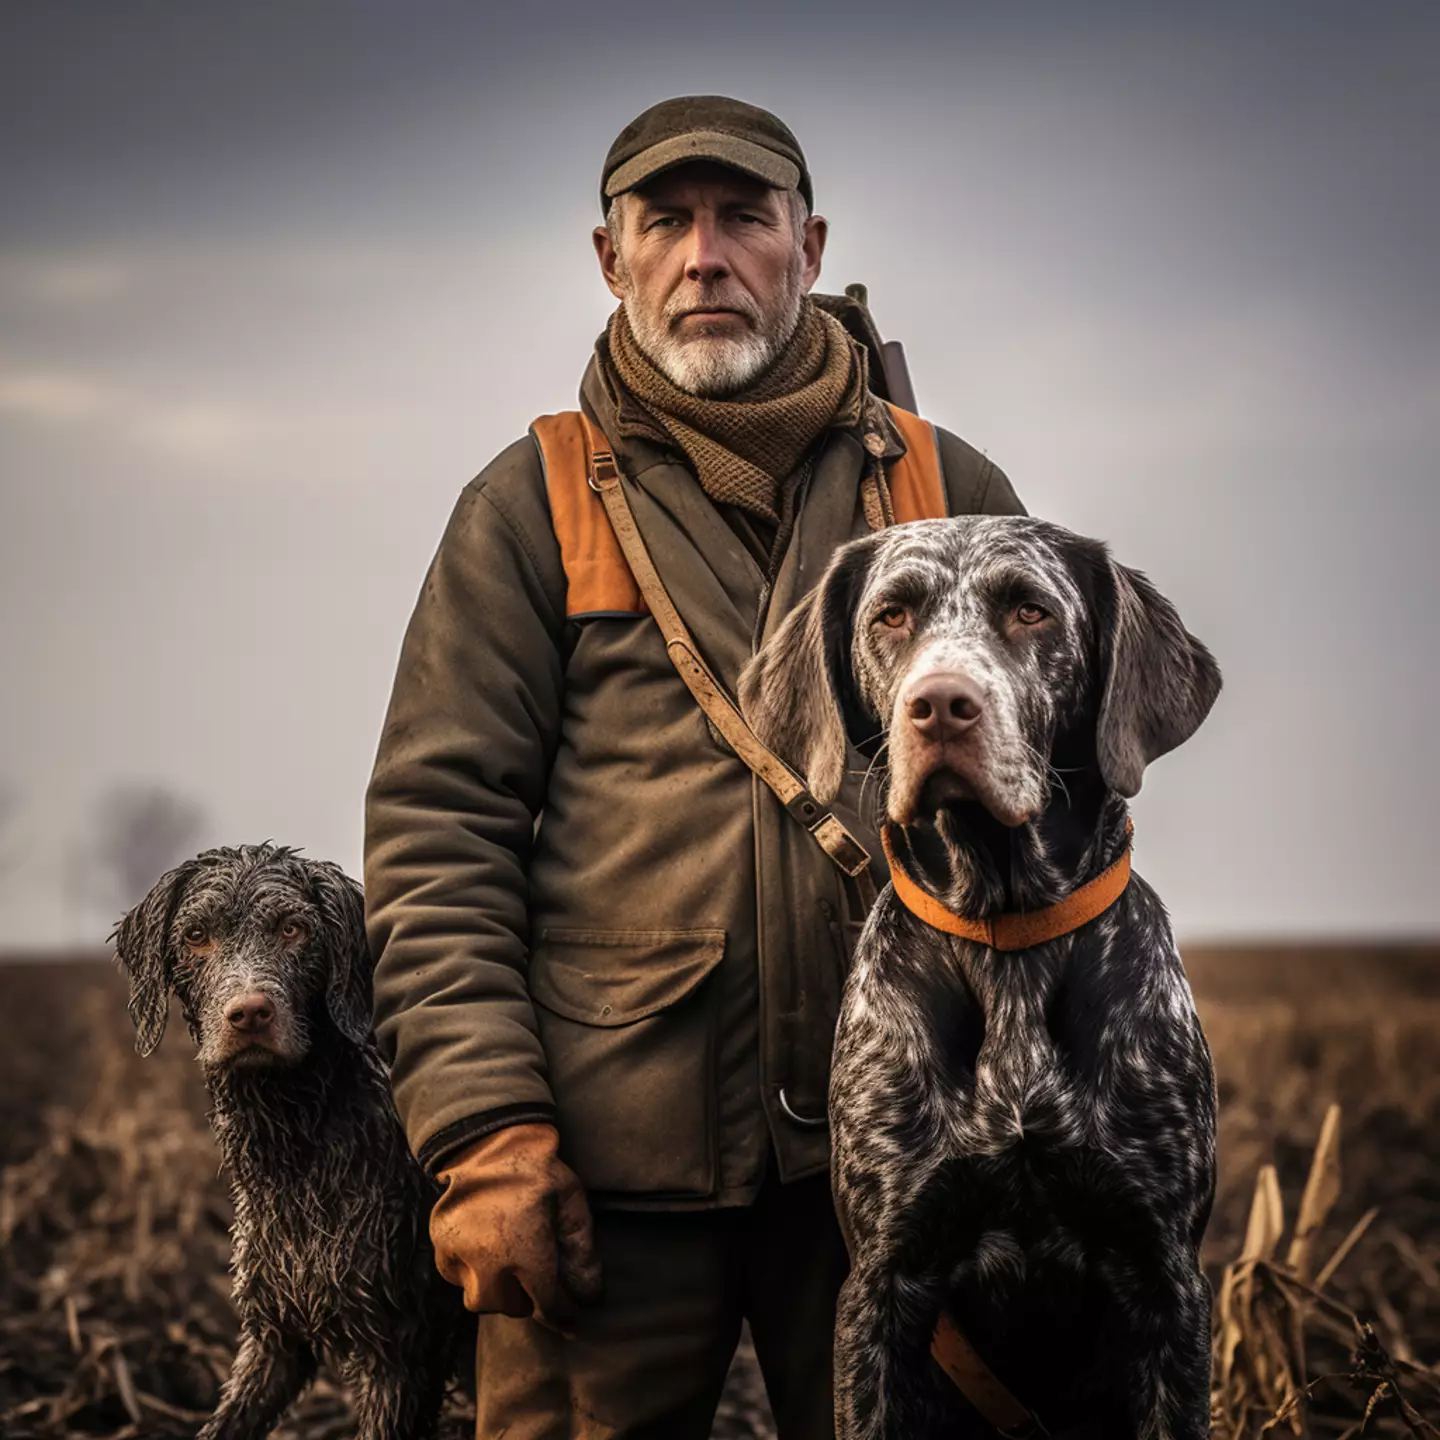 The German shorthaired pointer owner looks a bit threatening tbh.